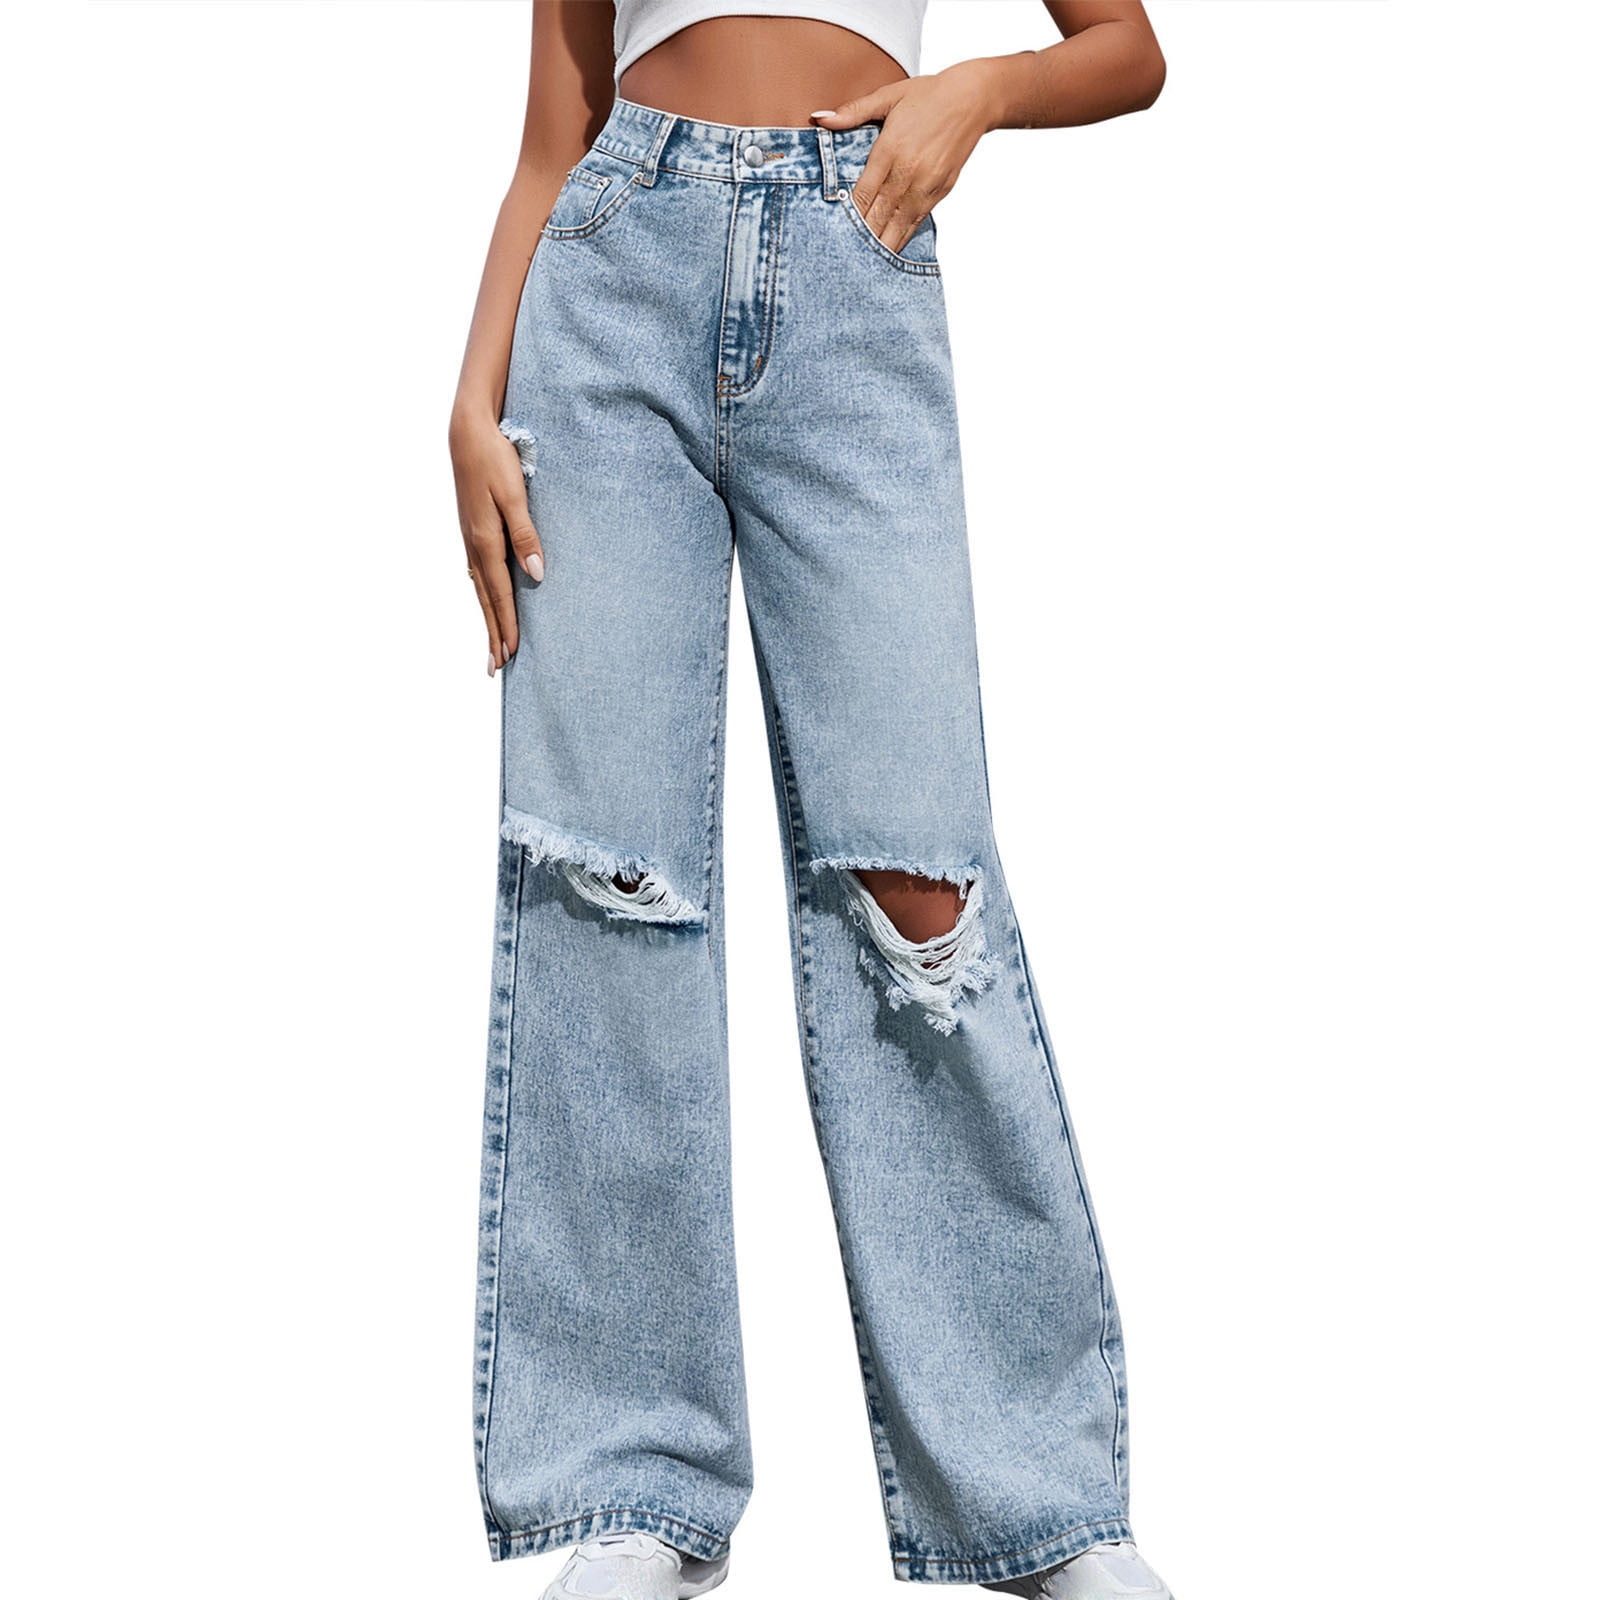 Women's Tall High Waist Ripped Stretch Flare Jeans